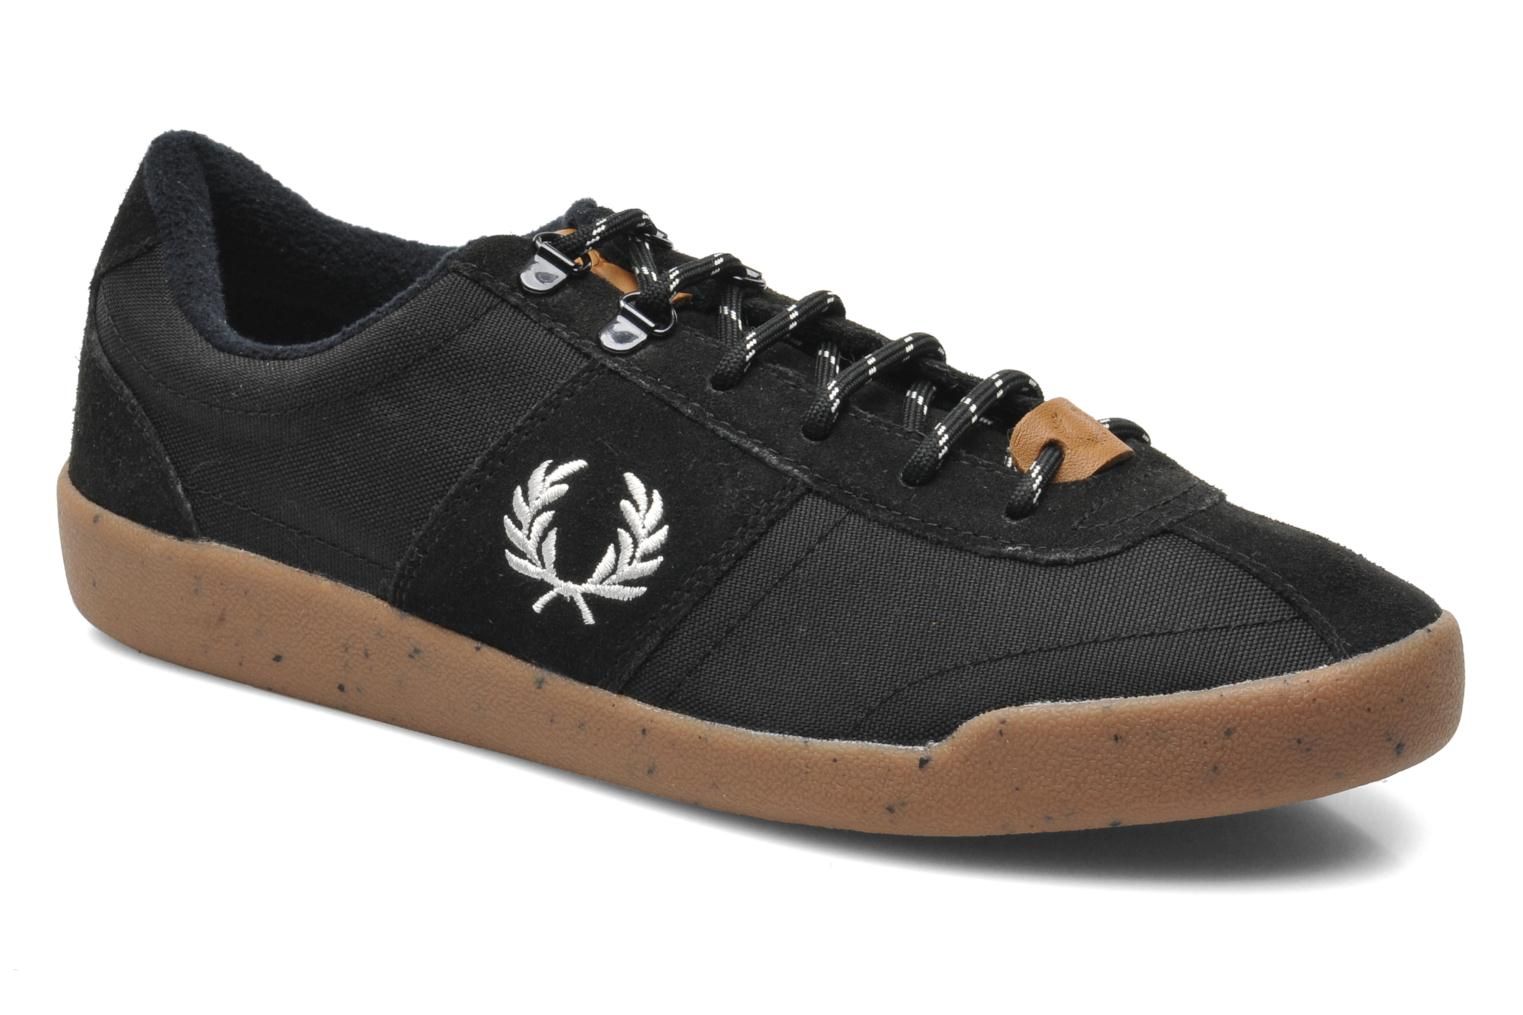 Stockport cordura suede par Fred Perry - Fred Perry - Pickture